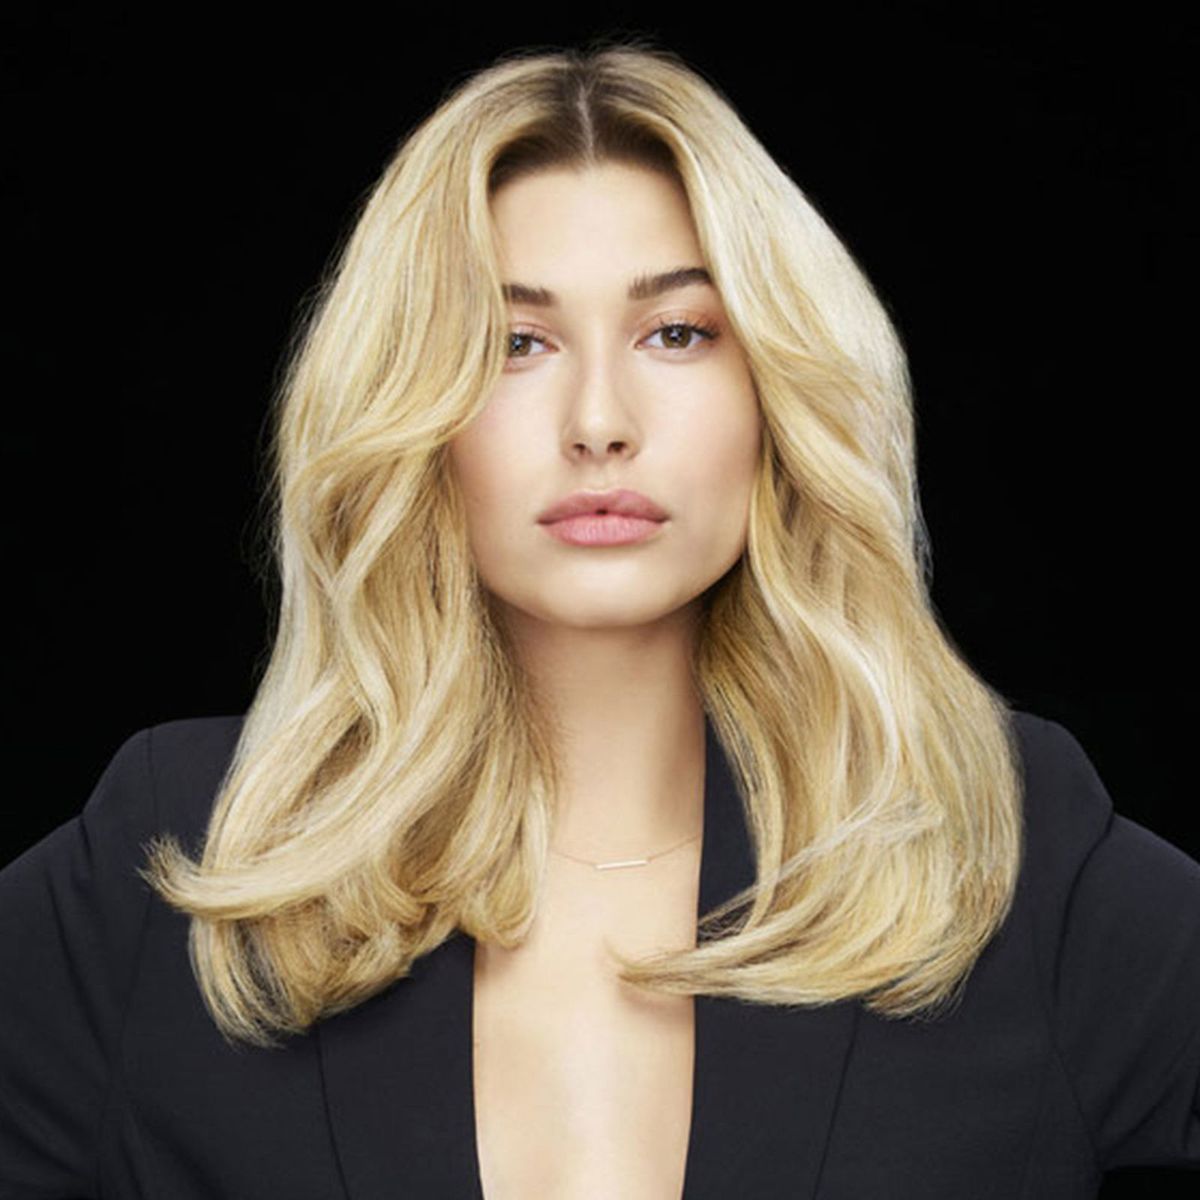 Hailey Baldwin and Taylor Hill are the new faces of L'Oreal